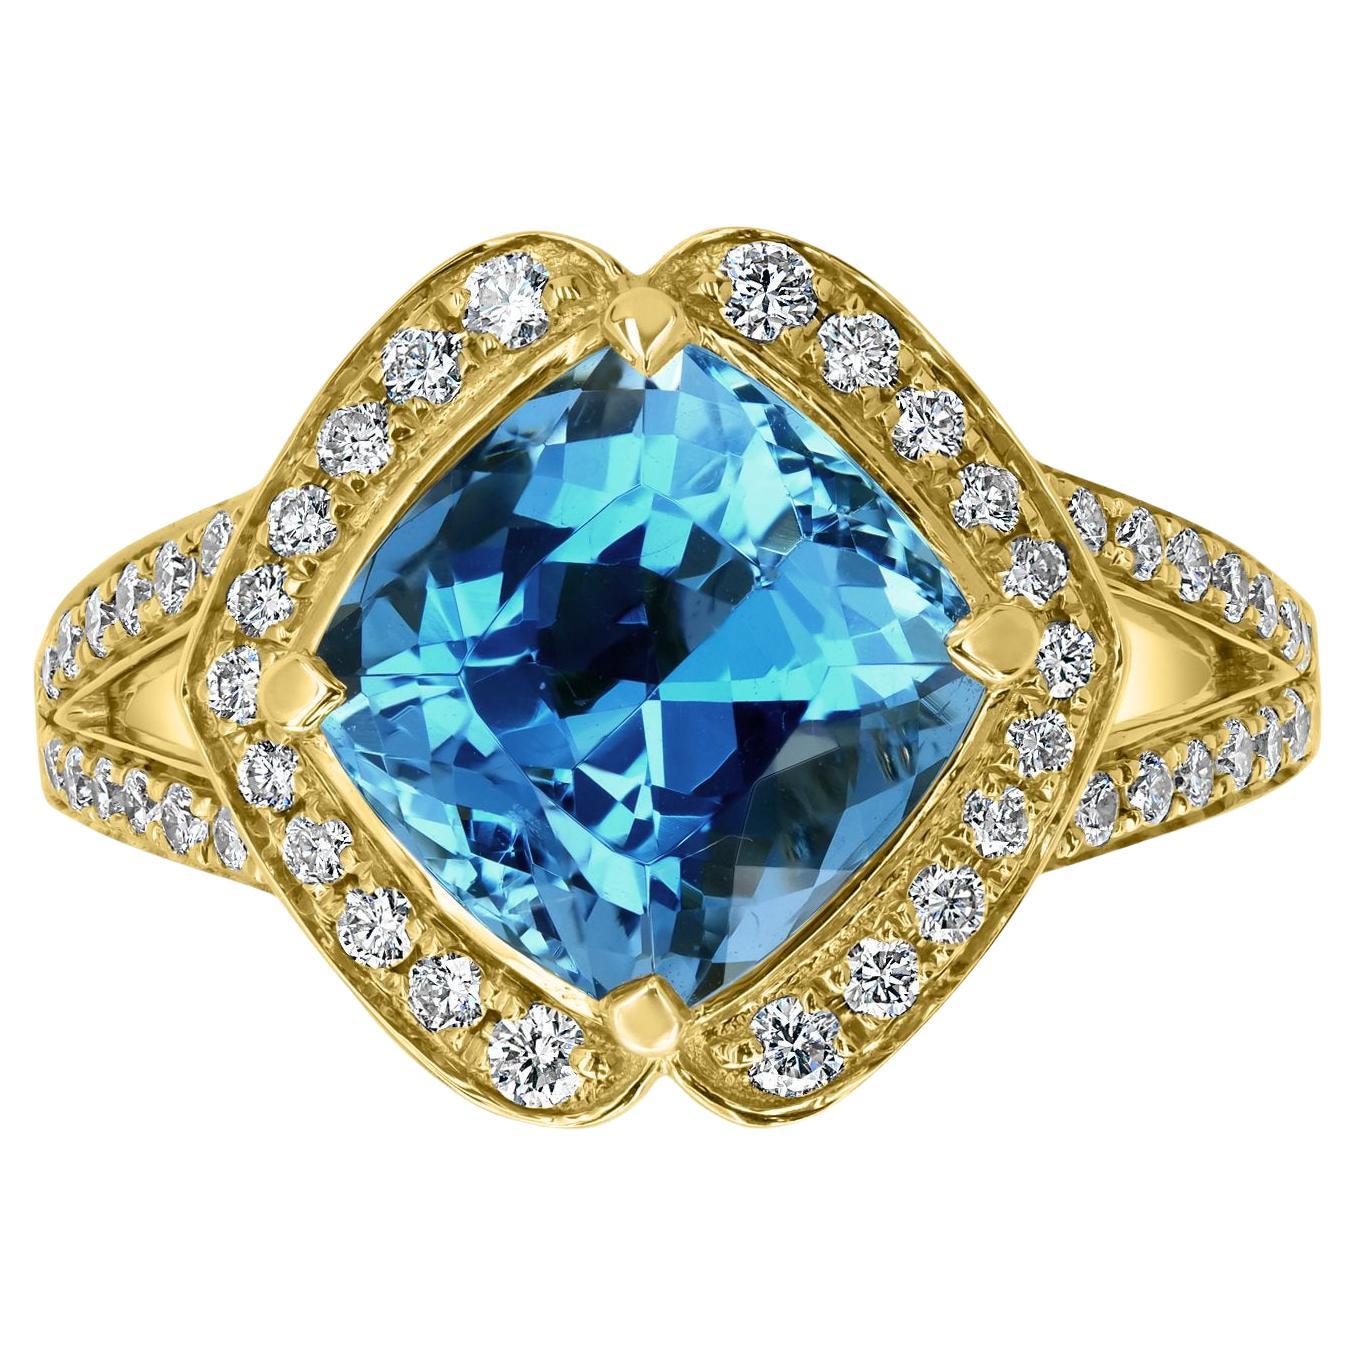 3.12ct Aquamarine Ring with 0.42Tct Diamonds Set in 14K Yellow Gold For Sale